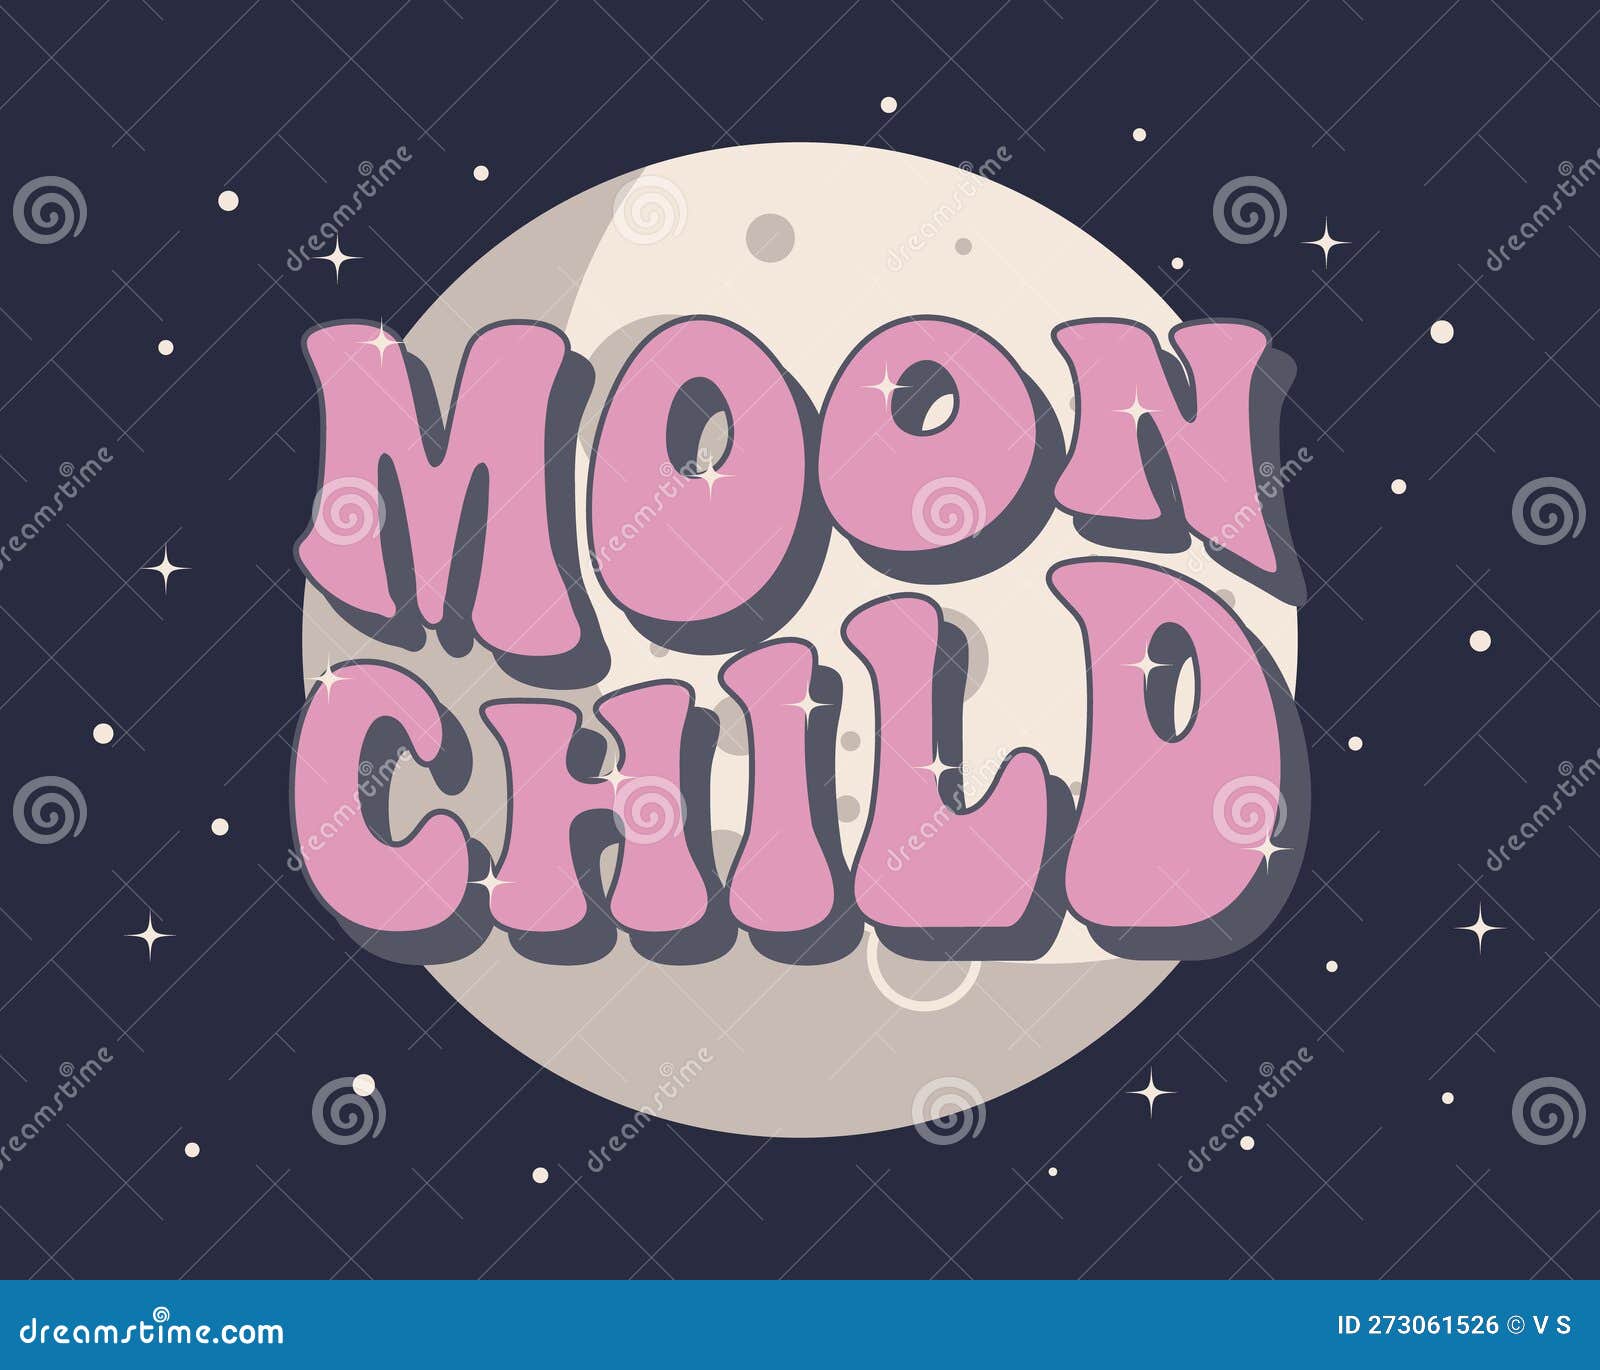 Lettering Moon Child on the Background of the Full Moon. Hand Drawn  Calligraphic Groove Lettering, Phrase Stock Vector - Illustration of  vector, presentation: 273061526